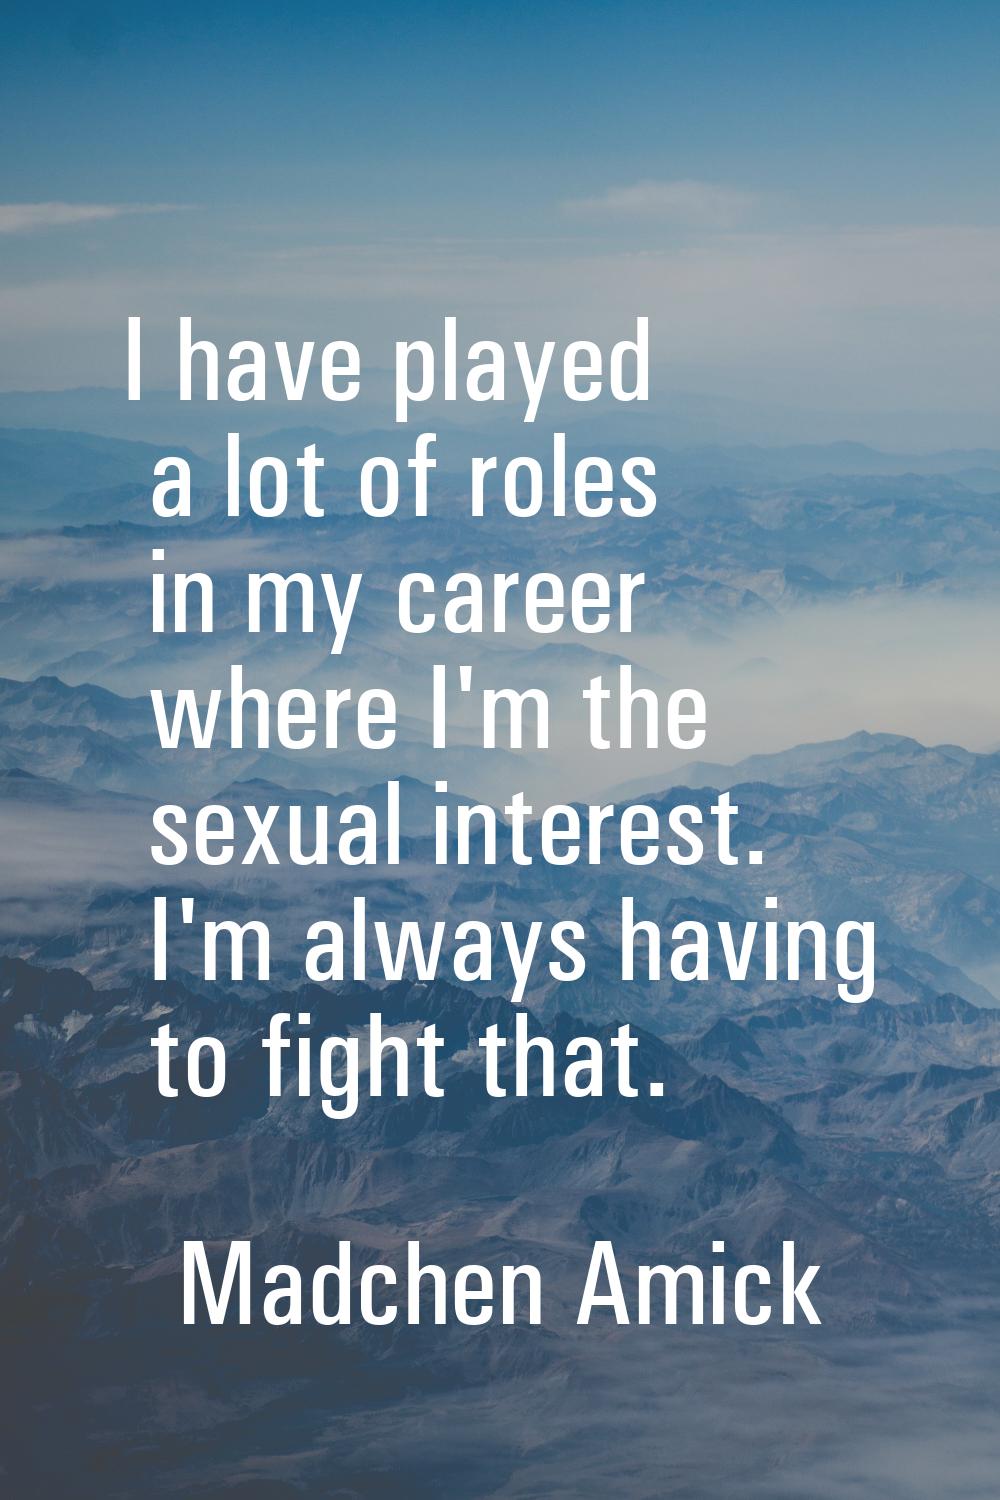 I have played a lot of roles in my career where I'm the sexual interest. I'm always having to fight